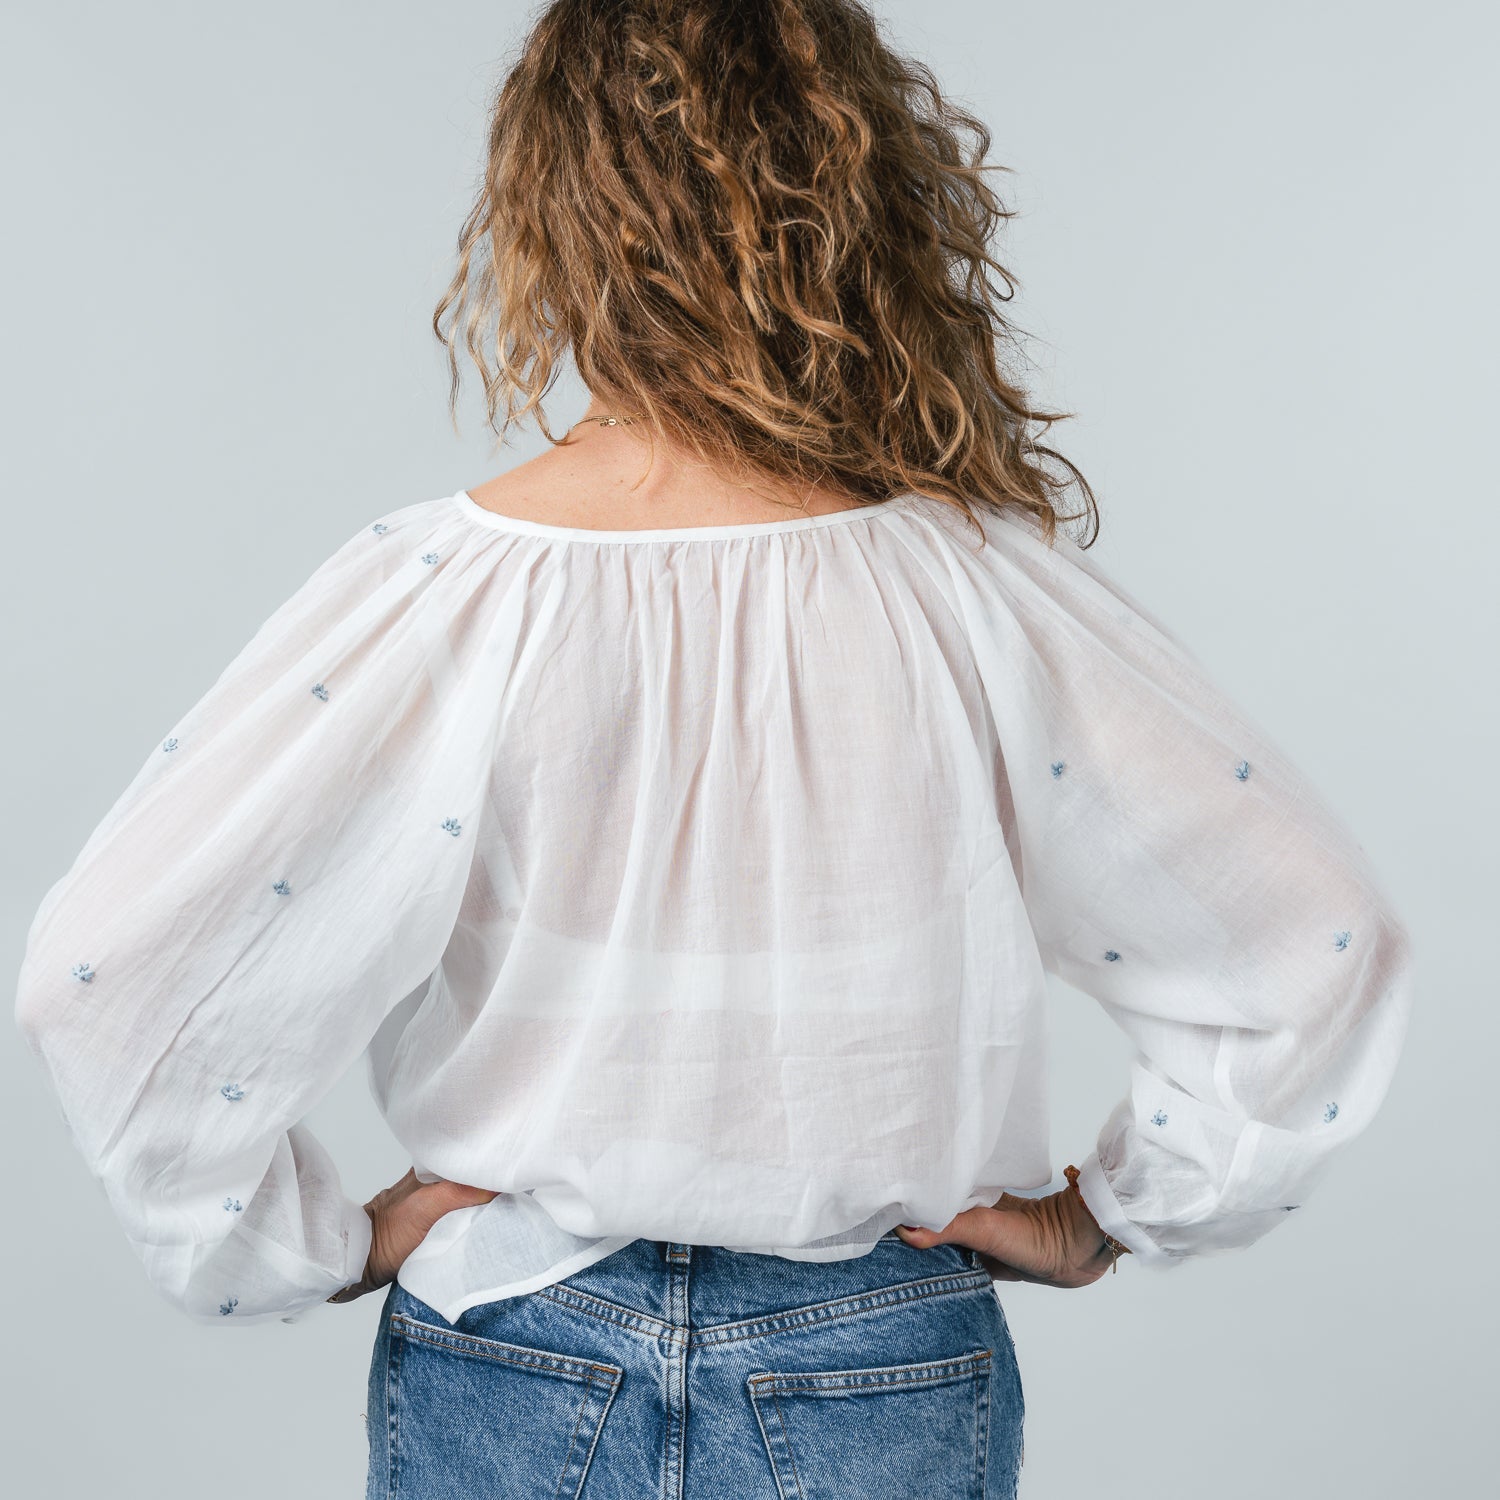 Embroidered Floral Blouse 